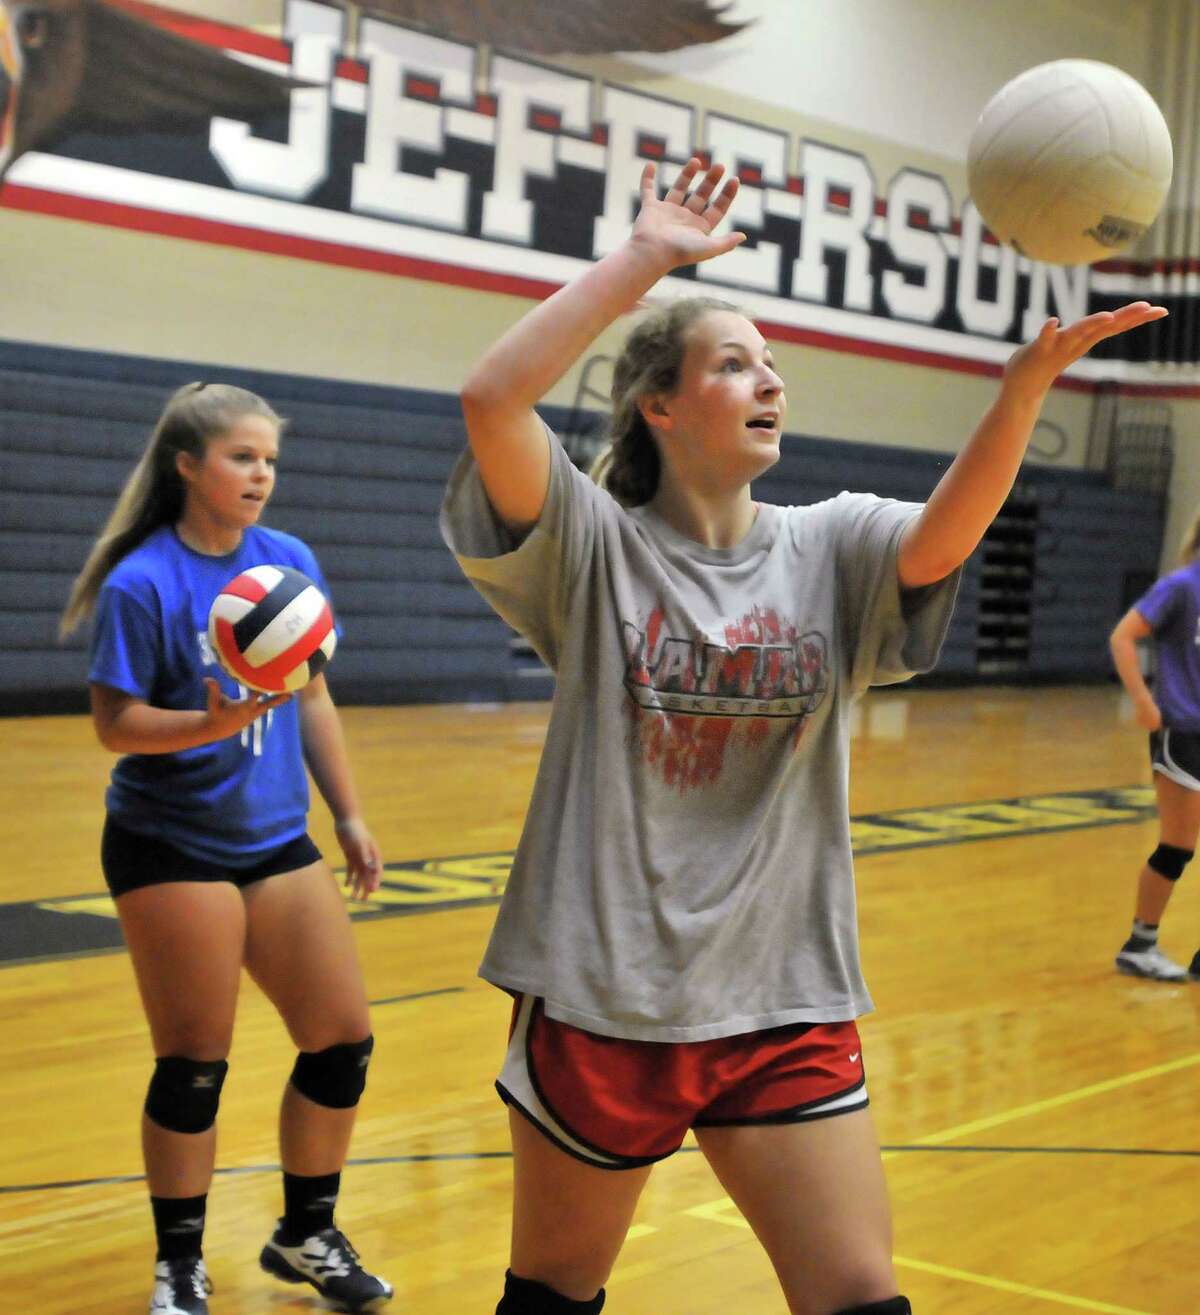 Hardin-Jefferson's Abby Swope, right, prepares to serve the ball while teammate Kassidy Shackleford, left, waits her turn during practice Monday at the school's competition gym in Sour Lake. (Mike Tobias/The Enterprise)